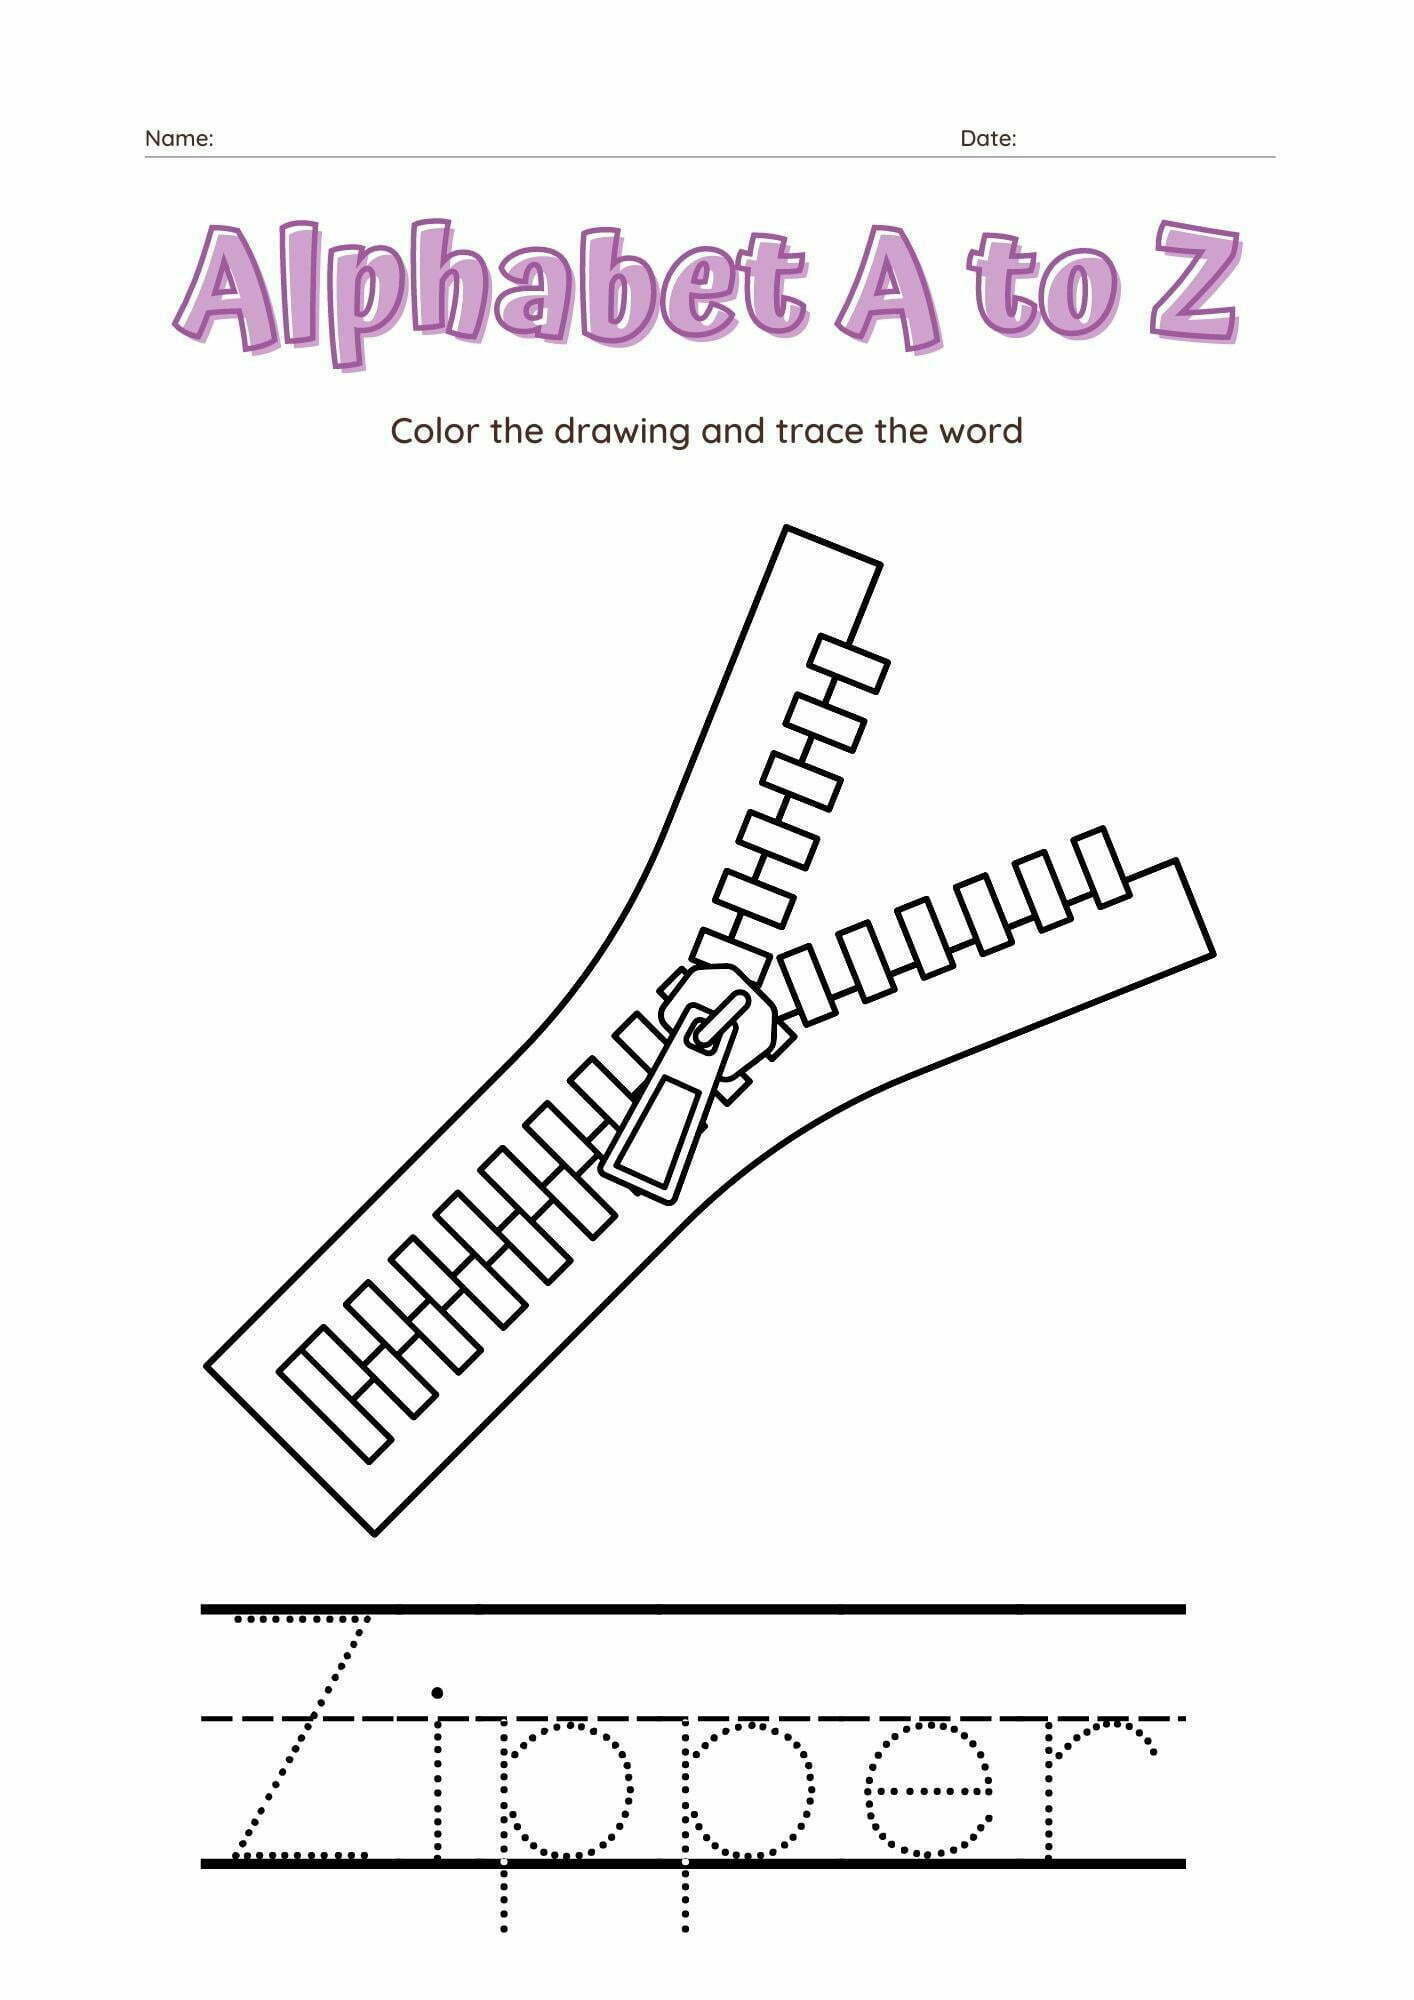 A to Z Free Printable Alphabet Coloring Pages for Kids